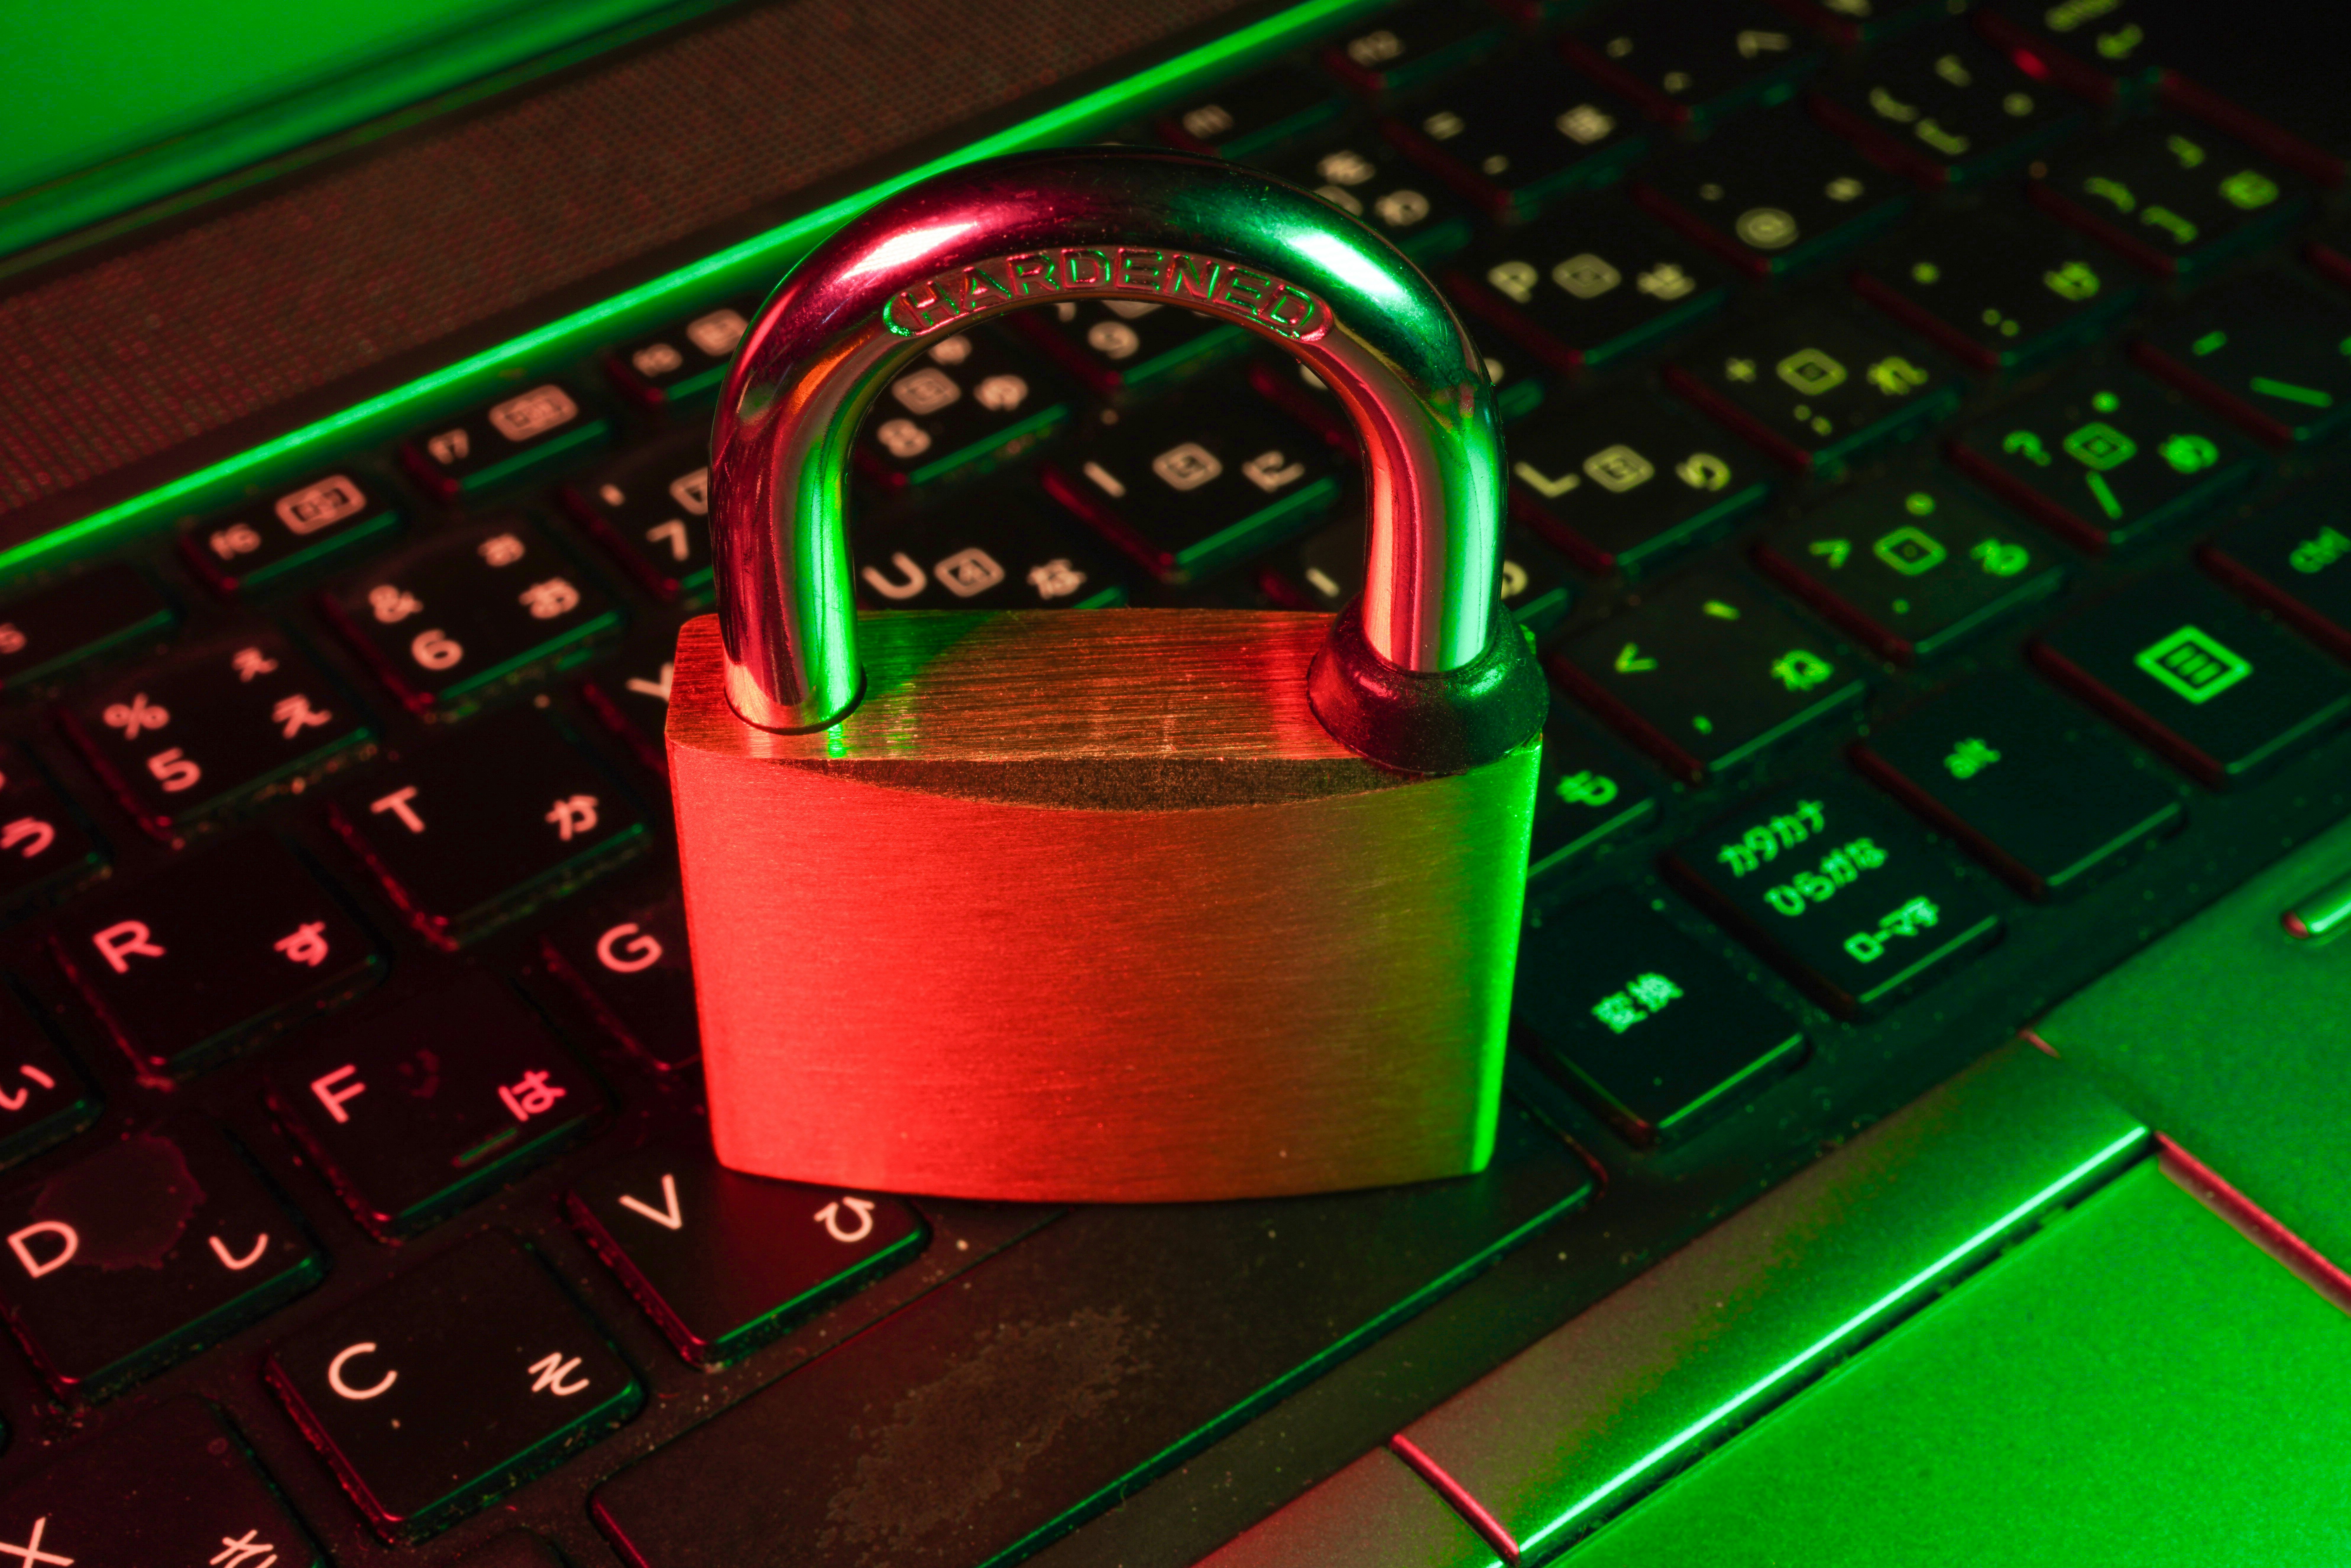 The Power of Practice: A Company’s Cybersecurity Policy Is Only As Solid As Its Implementation